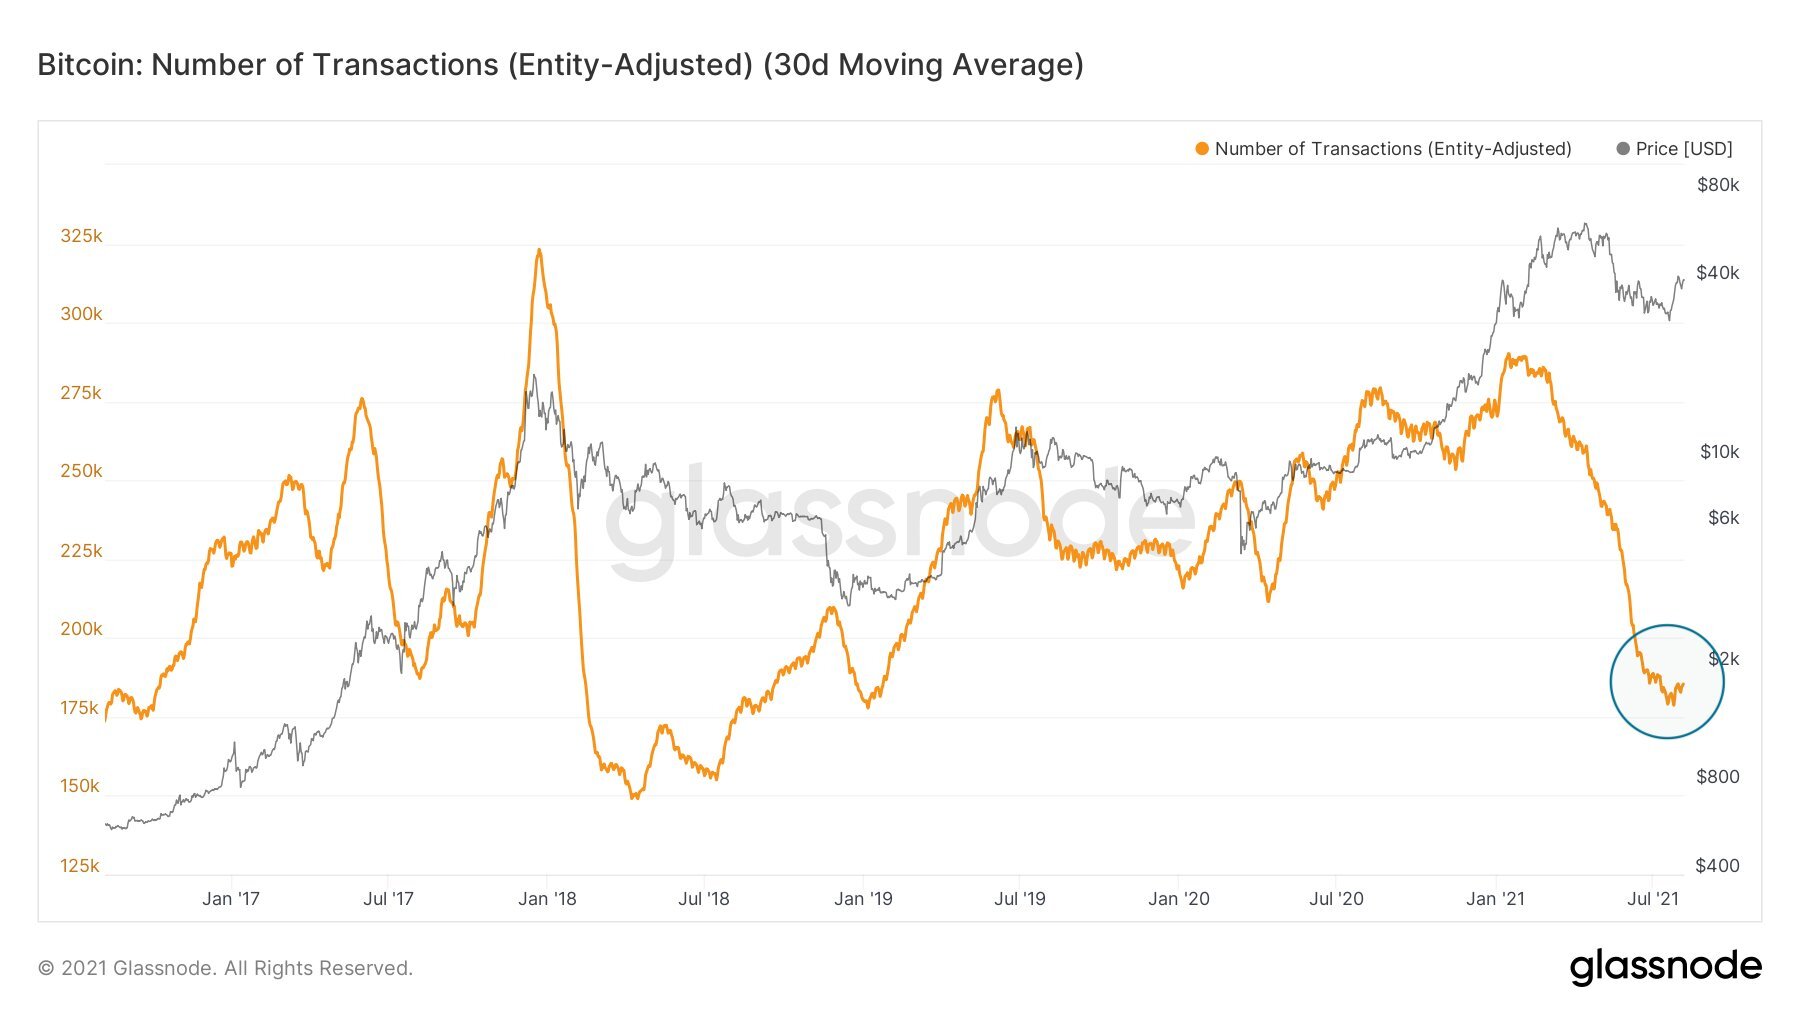  bitcoin entity-adjusted long-term on-chain bottom analysis two 